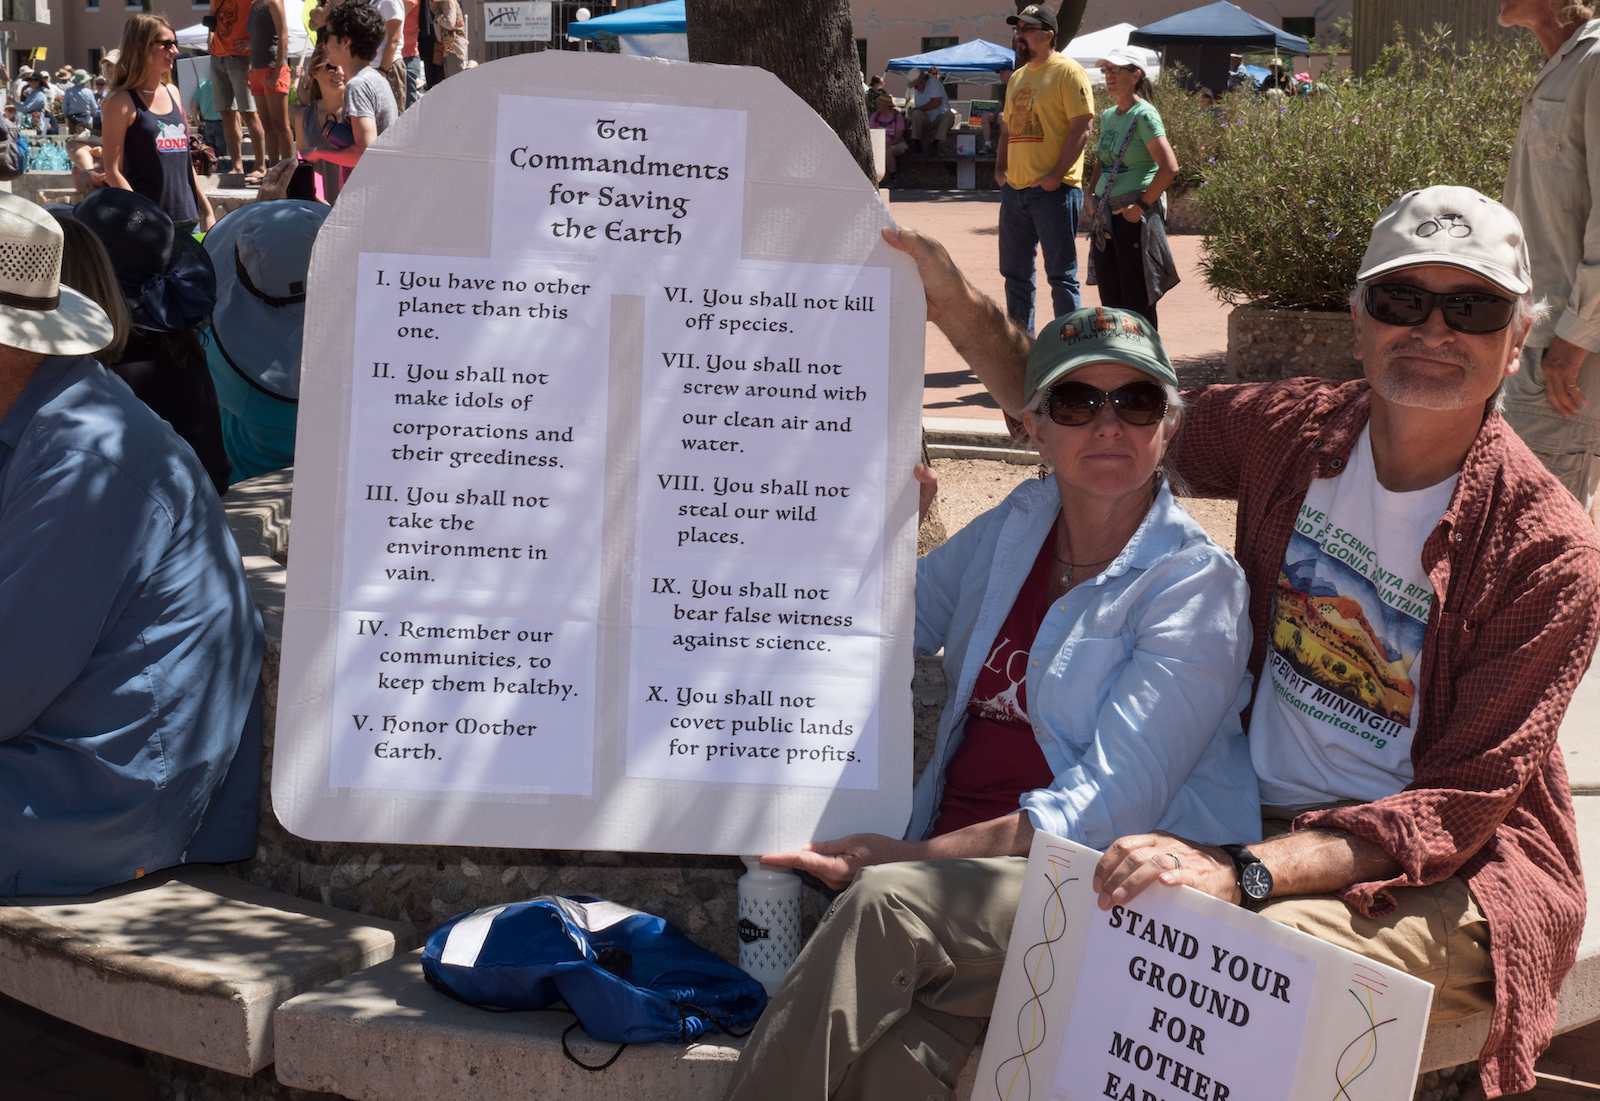 A couple holds up a poster with the "Ten Commandments for Saving the Earth" at the Arizona People's Climate March in 2017.